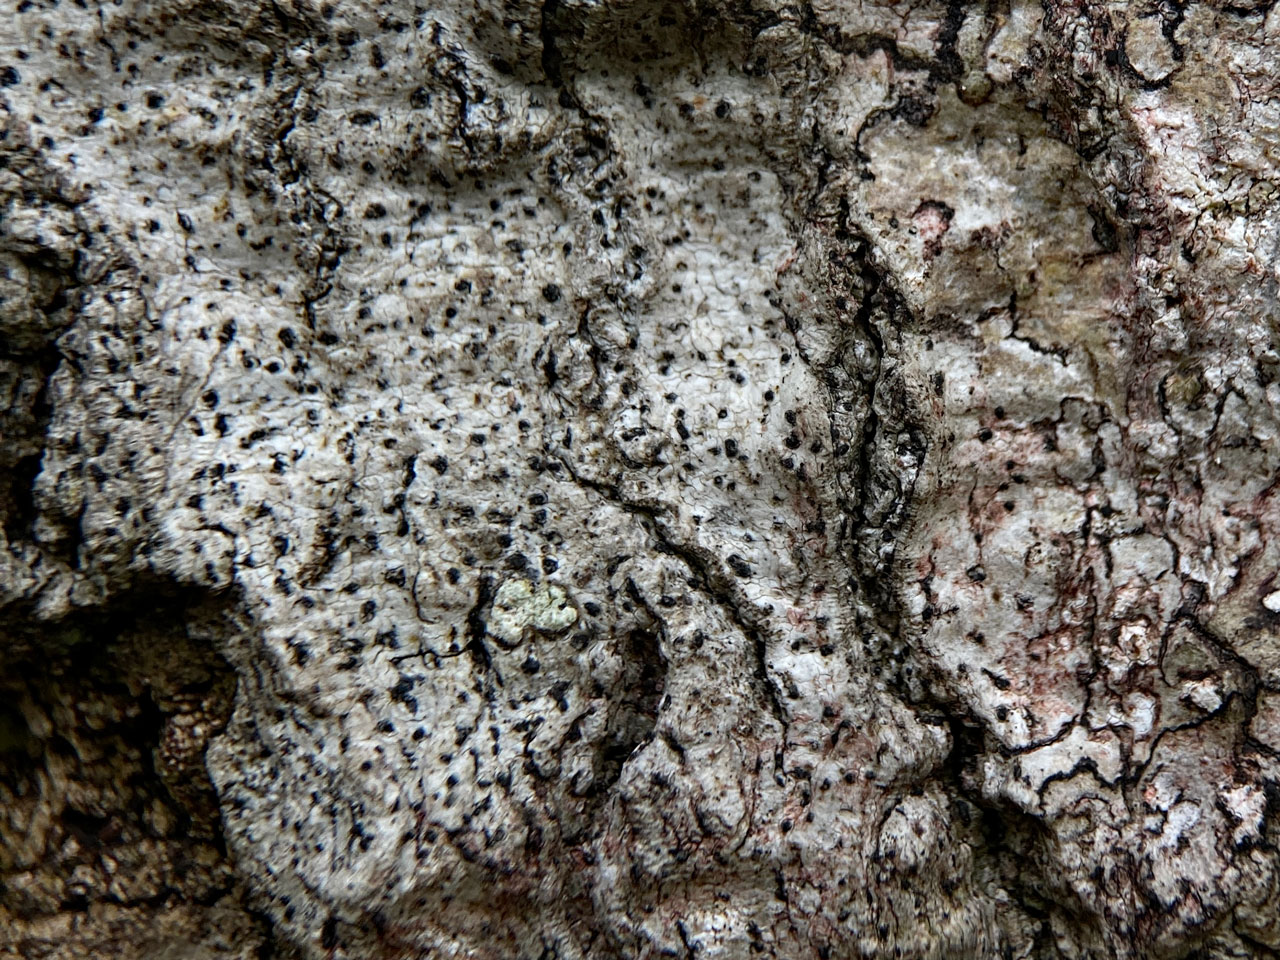 Strigula tagananae, pycnidia, Beech, Busketts Wood, New Forest